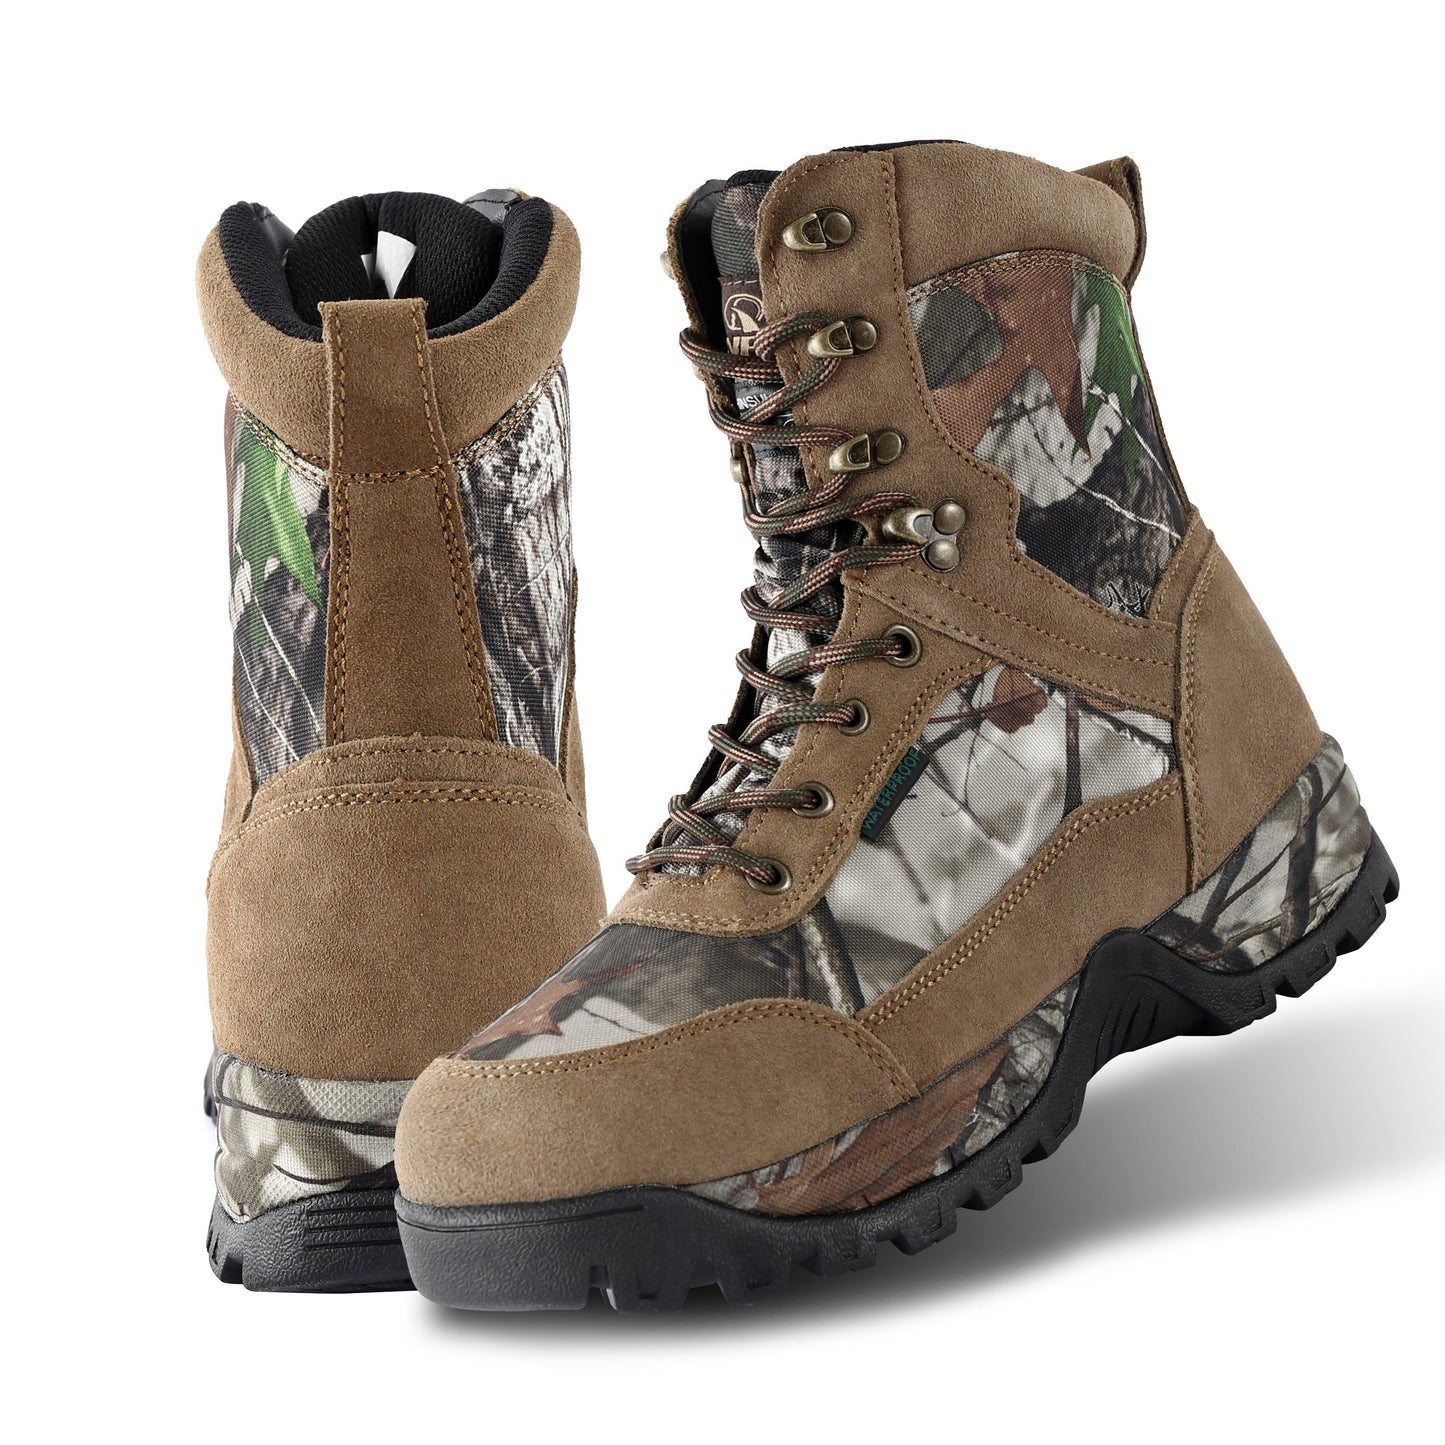 men's light weight hunting boots